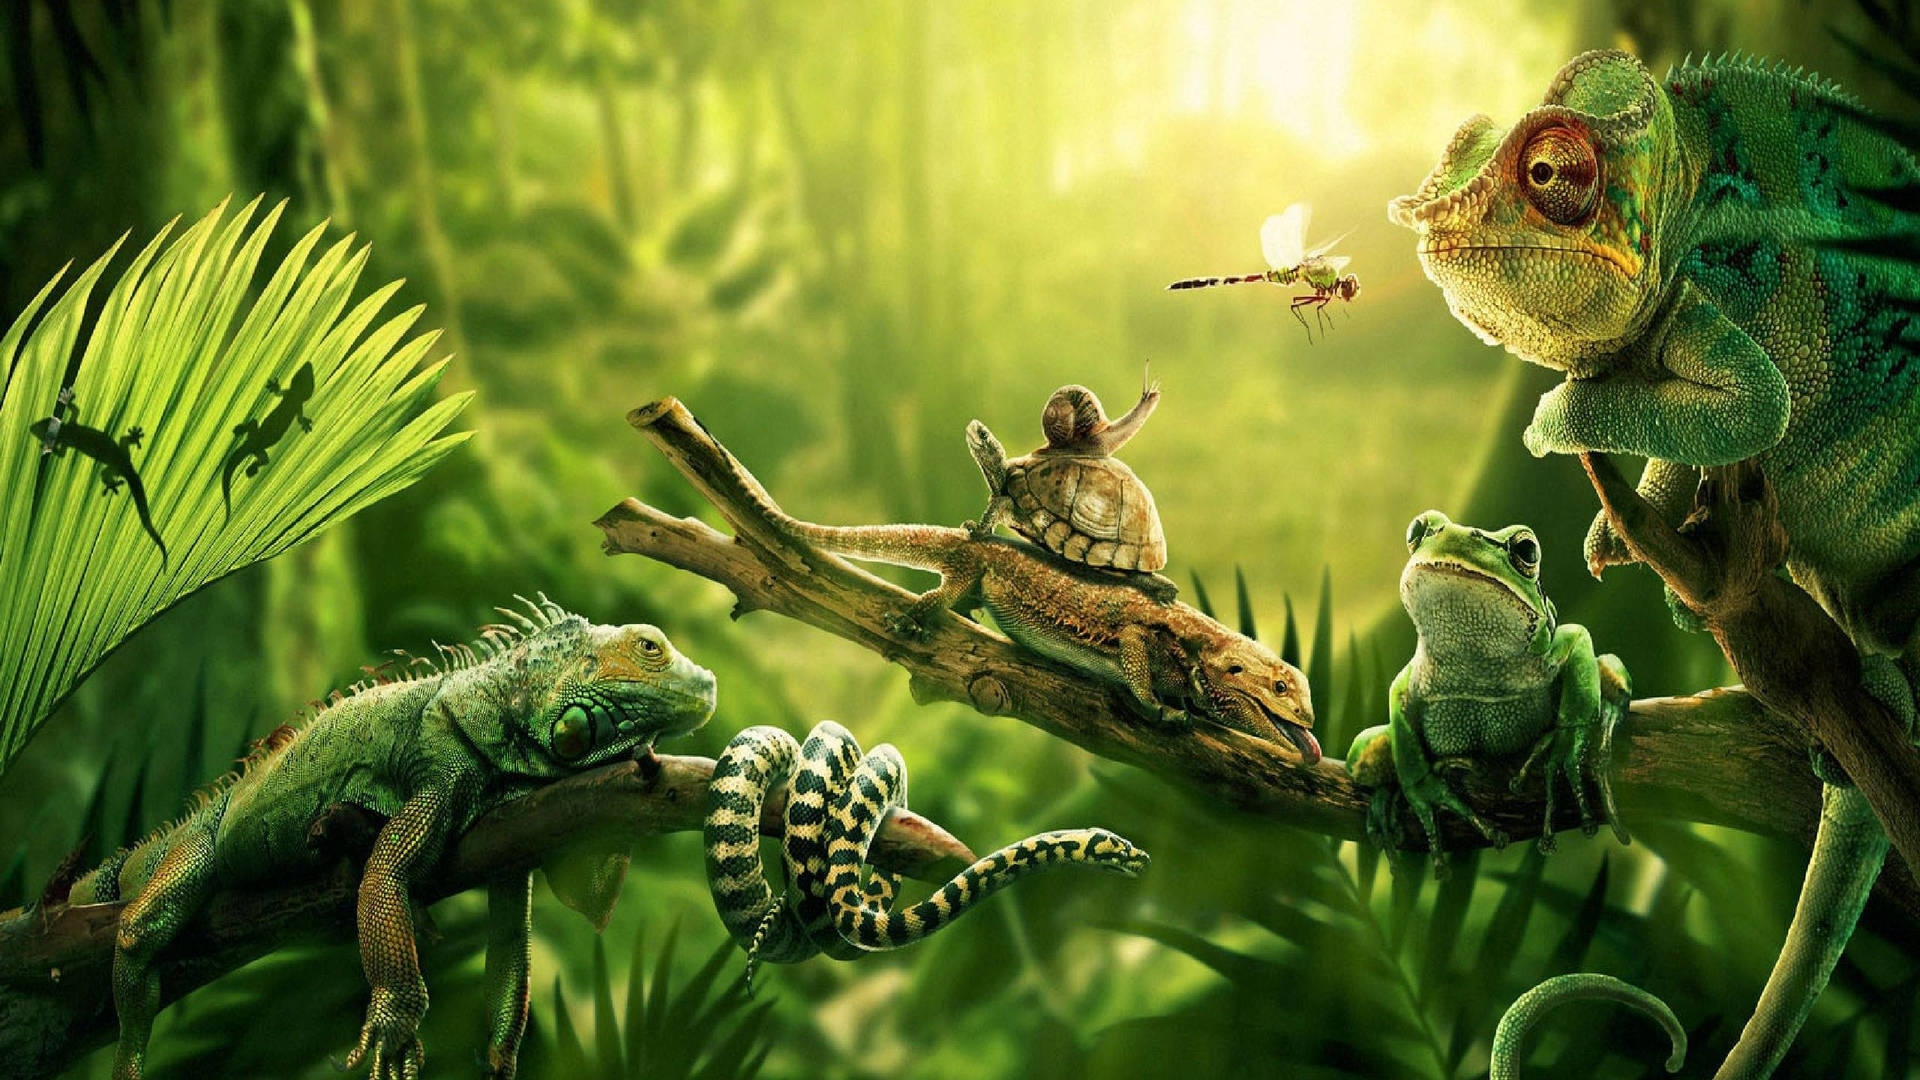 Reptiles Of The Jungle Background